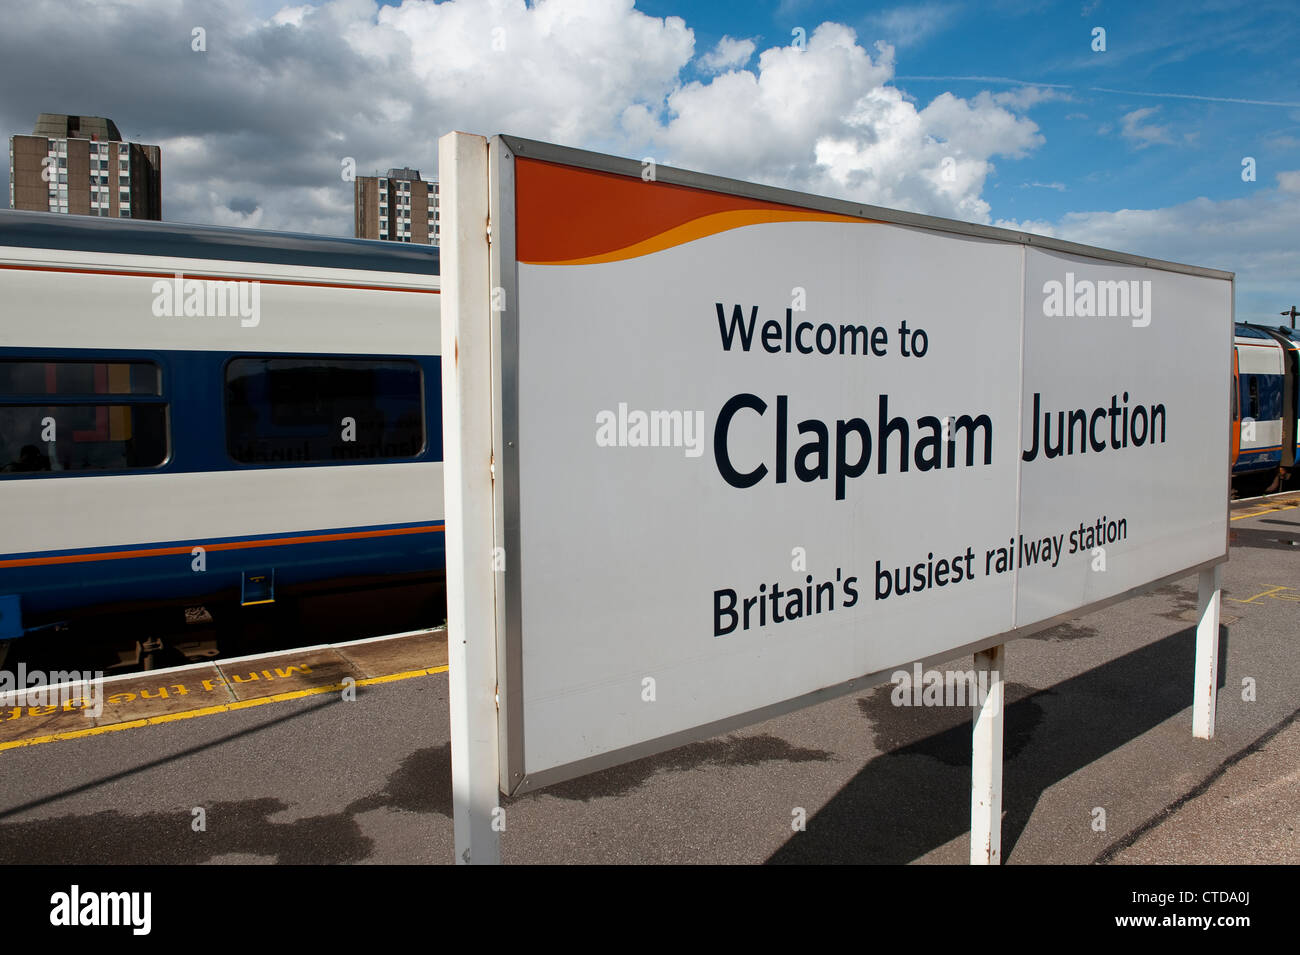 Welcome sign on the platform of Clapham Junction, Britain's busiest railway station, England. Stock Photo